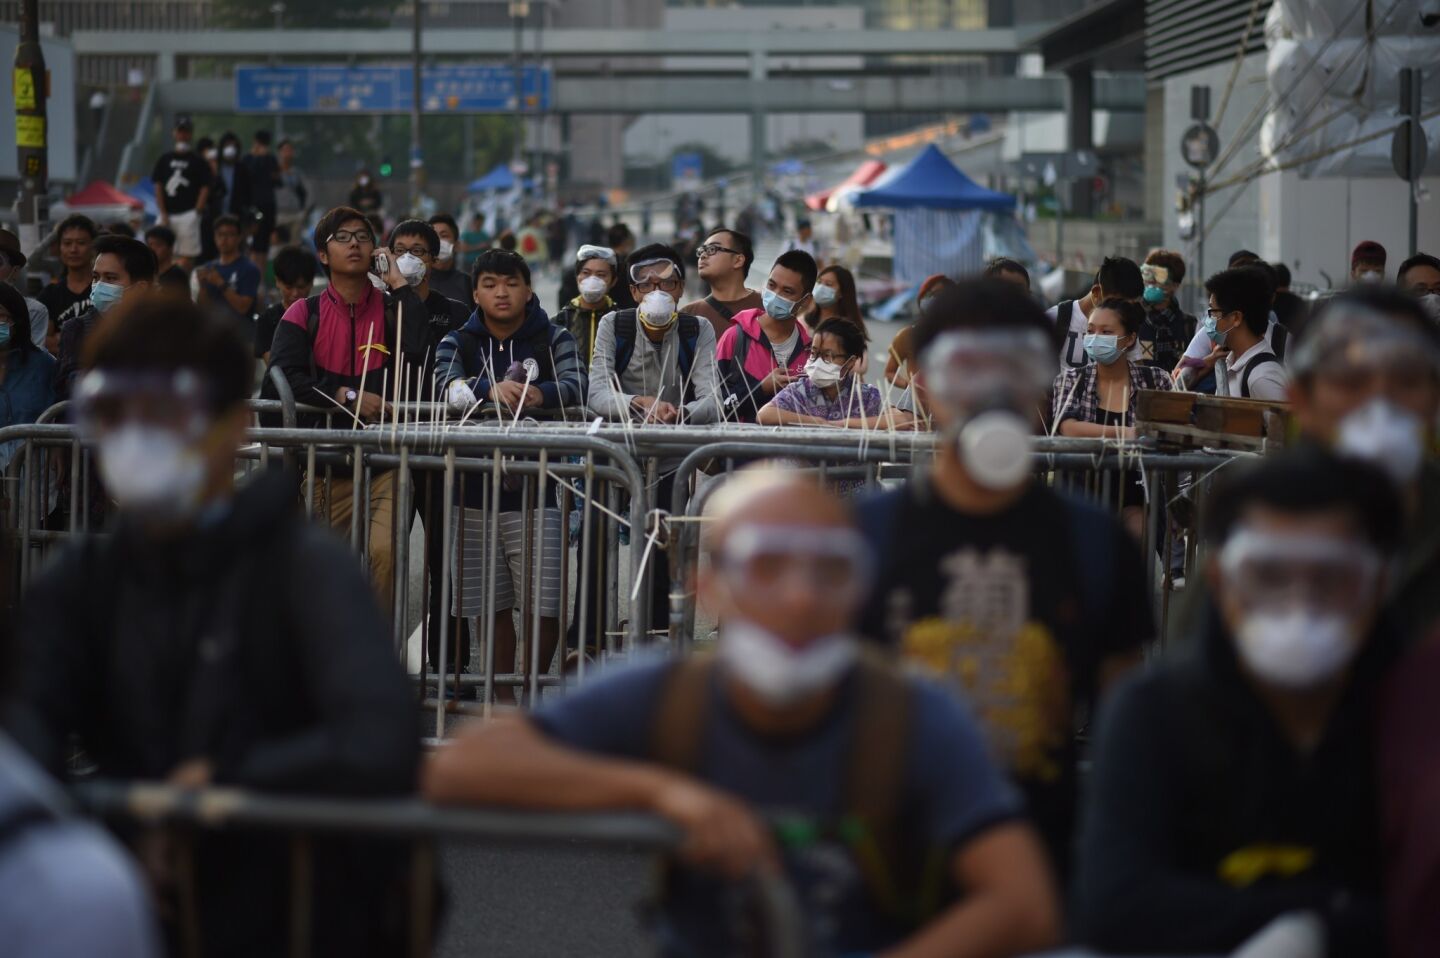 Pro-democracy protesters stand next to barricades as police officers gather in the central district of Hong Kong on Oct. 13.